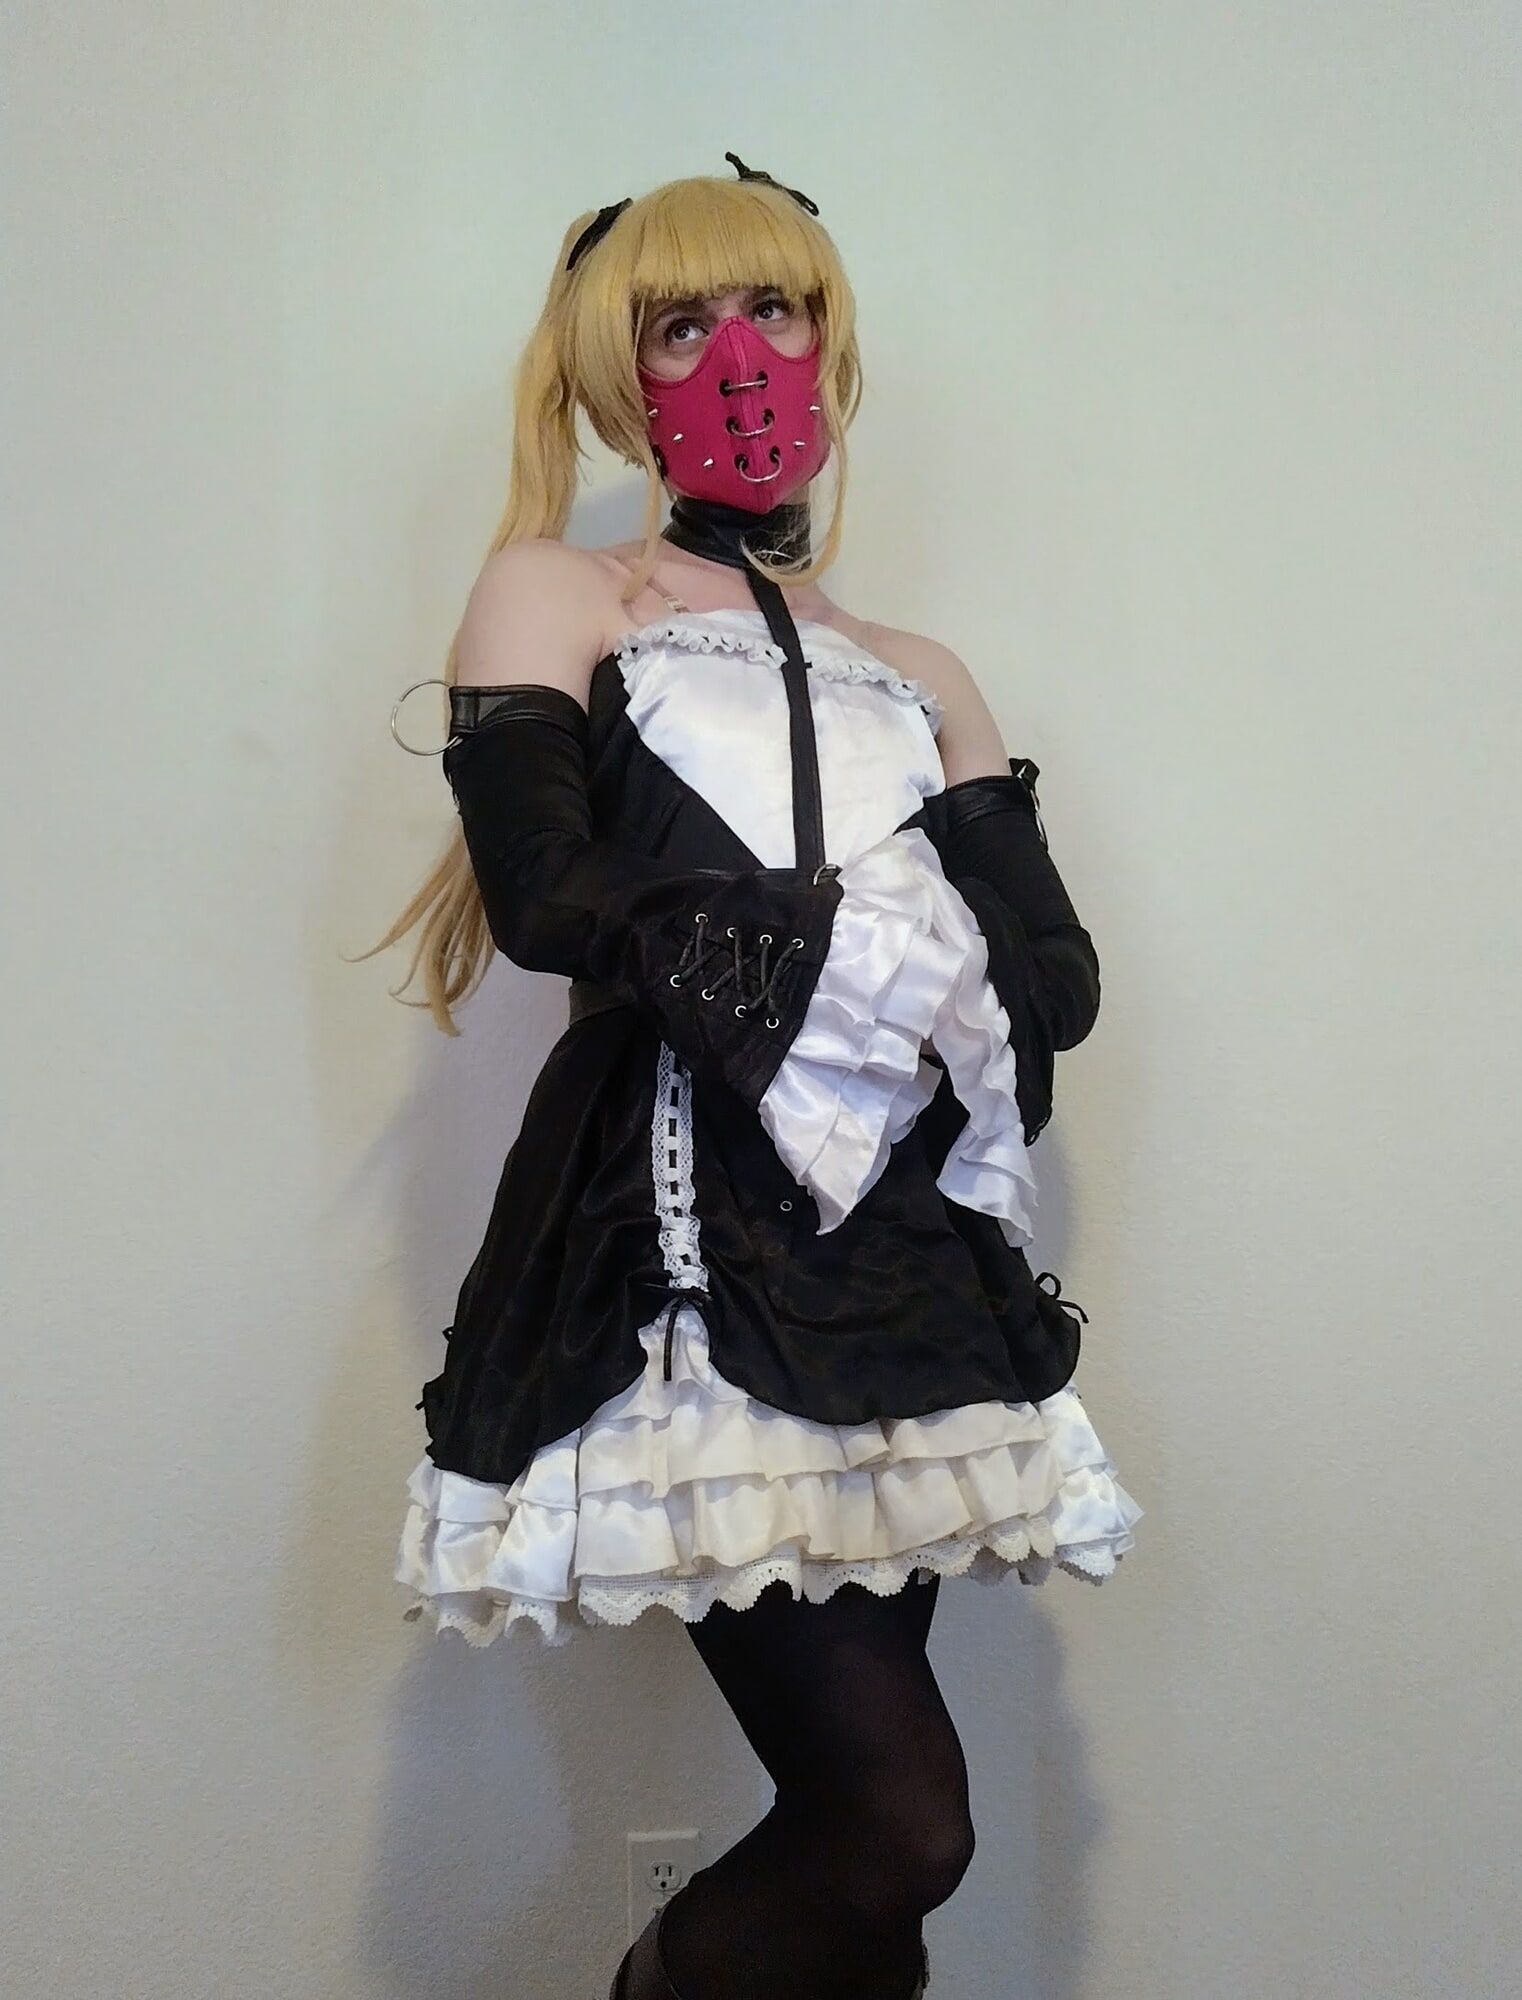 Cute Outfits & Cosplay 2 #35